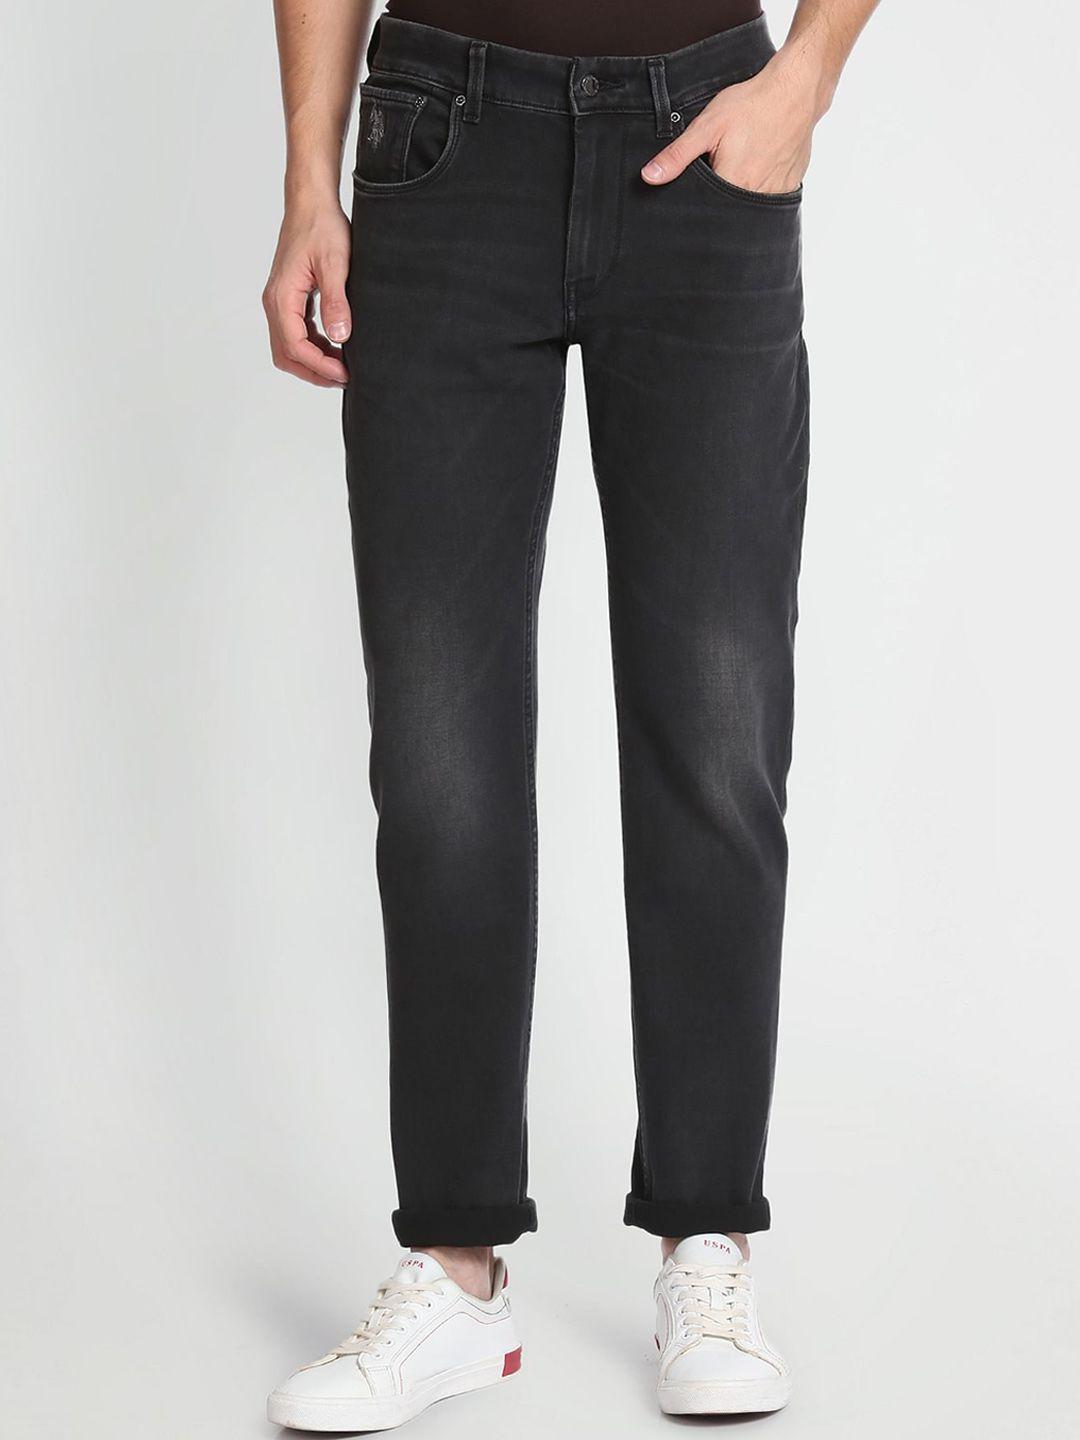 u-s-polo-assn-men-black-tapered-fit-stretchable-jeans